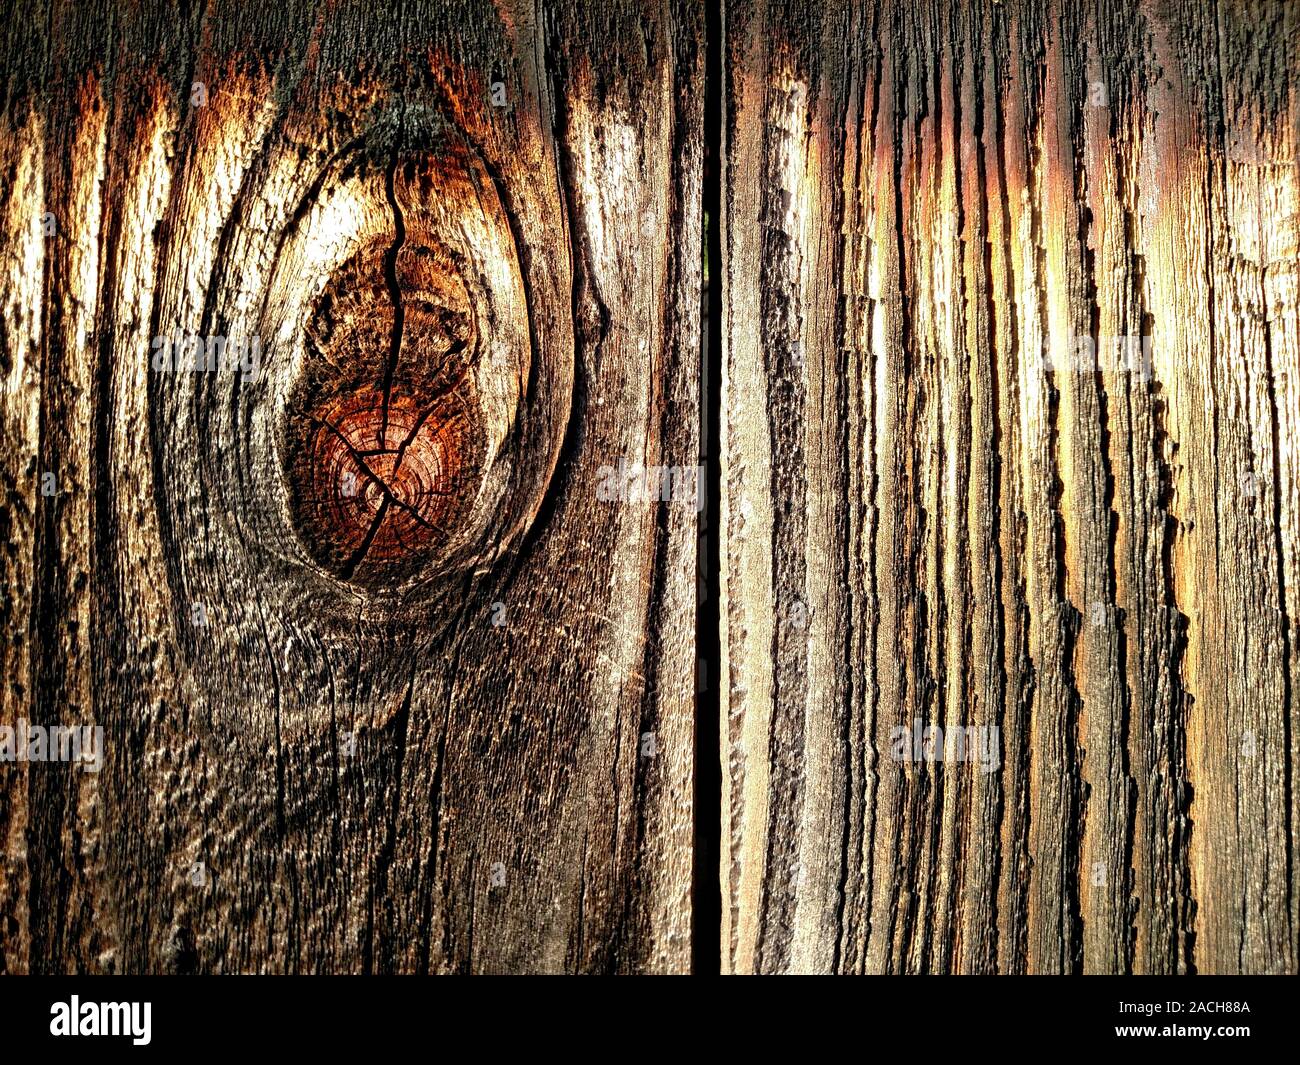 Wood grain patterns in a plank of wood in an old outdoor redwood fence Stock Photo